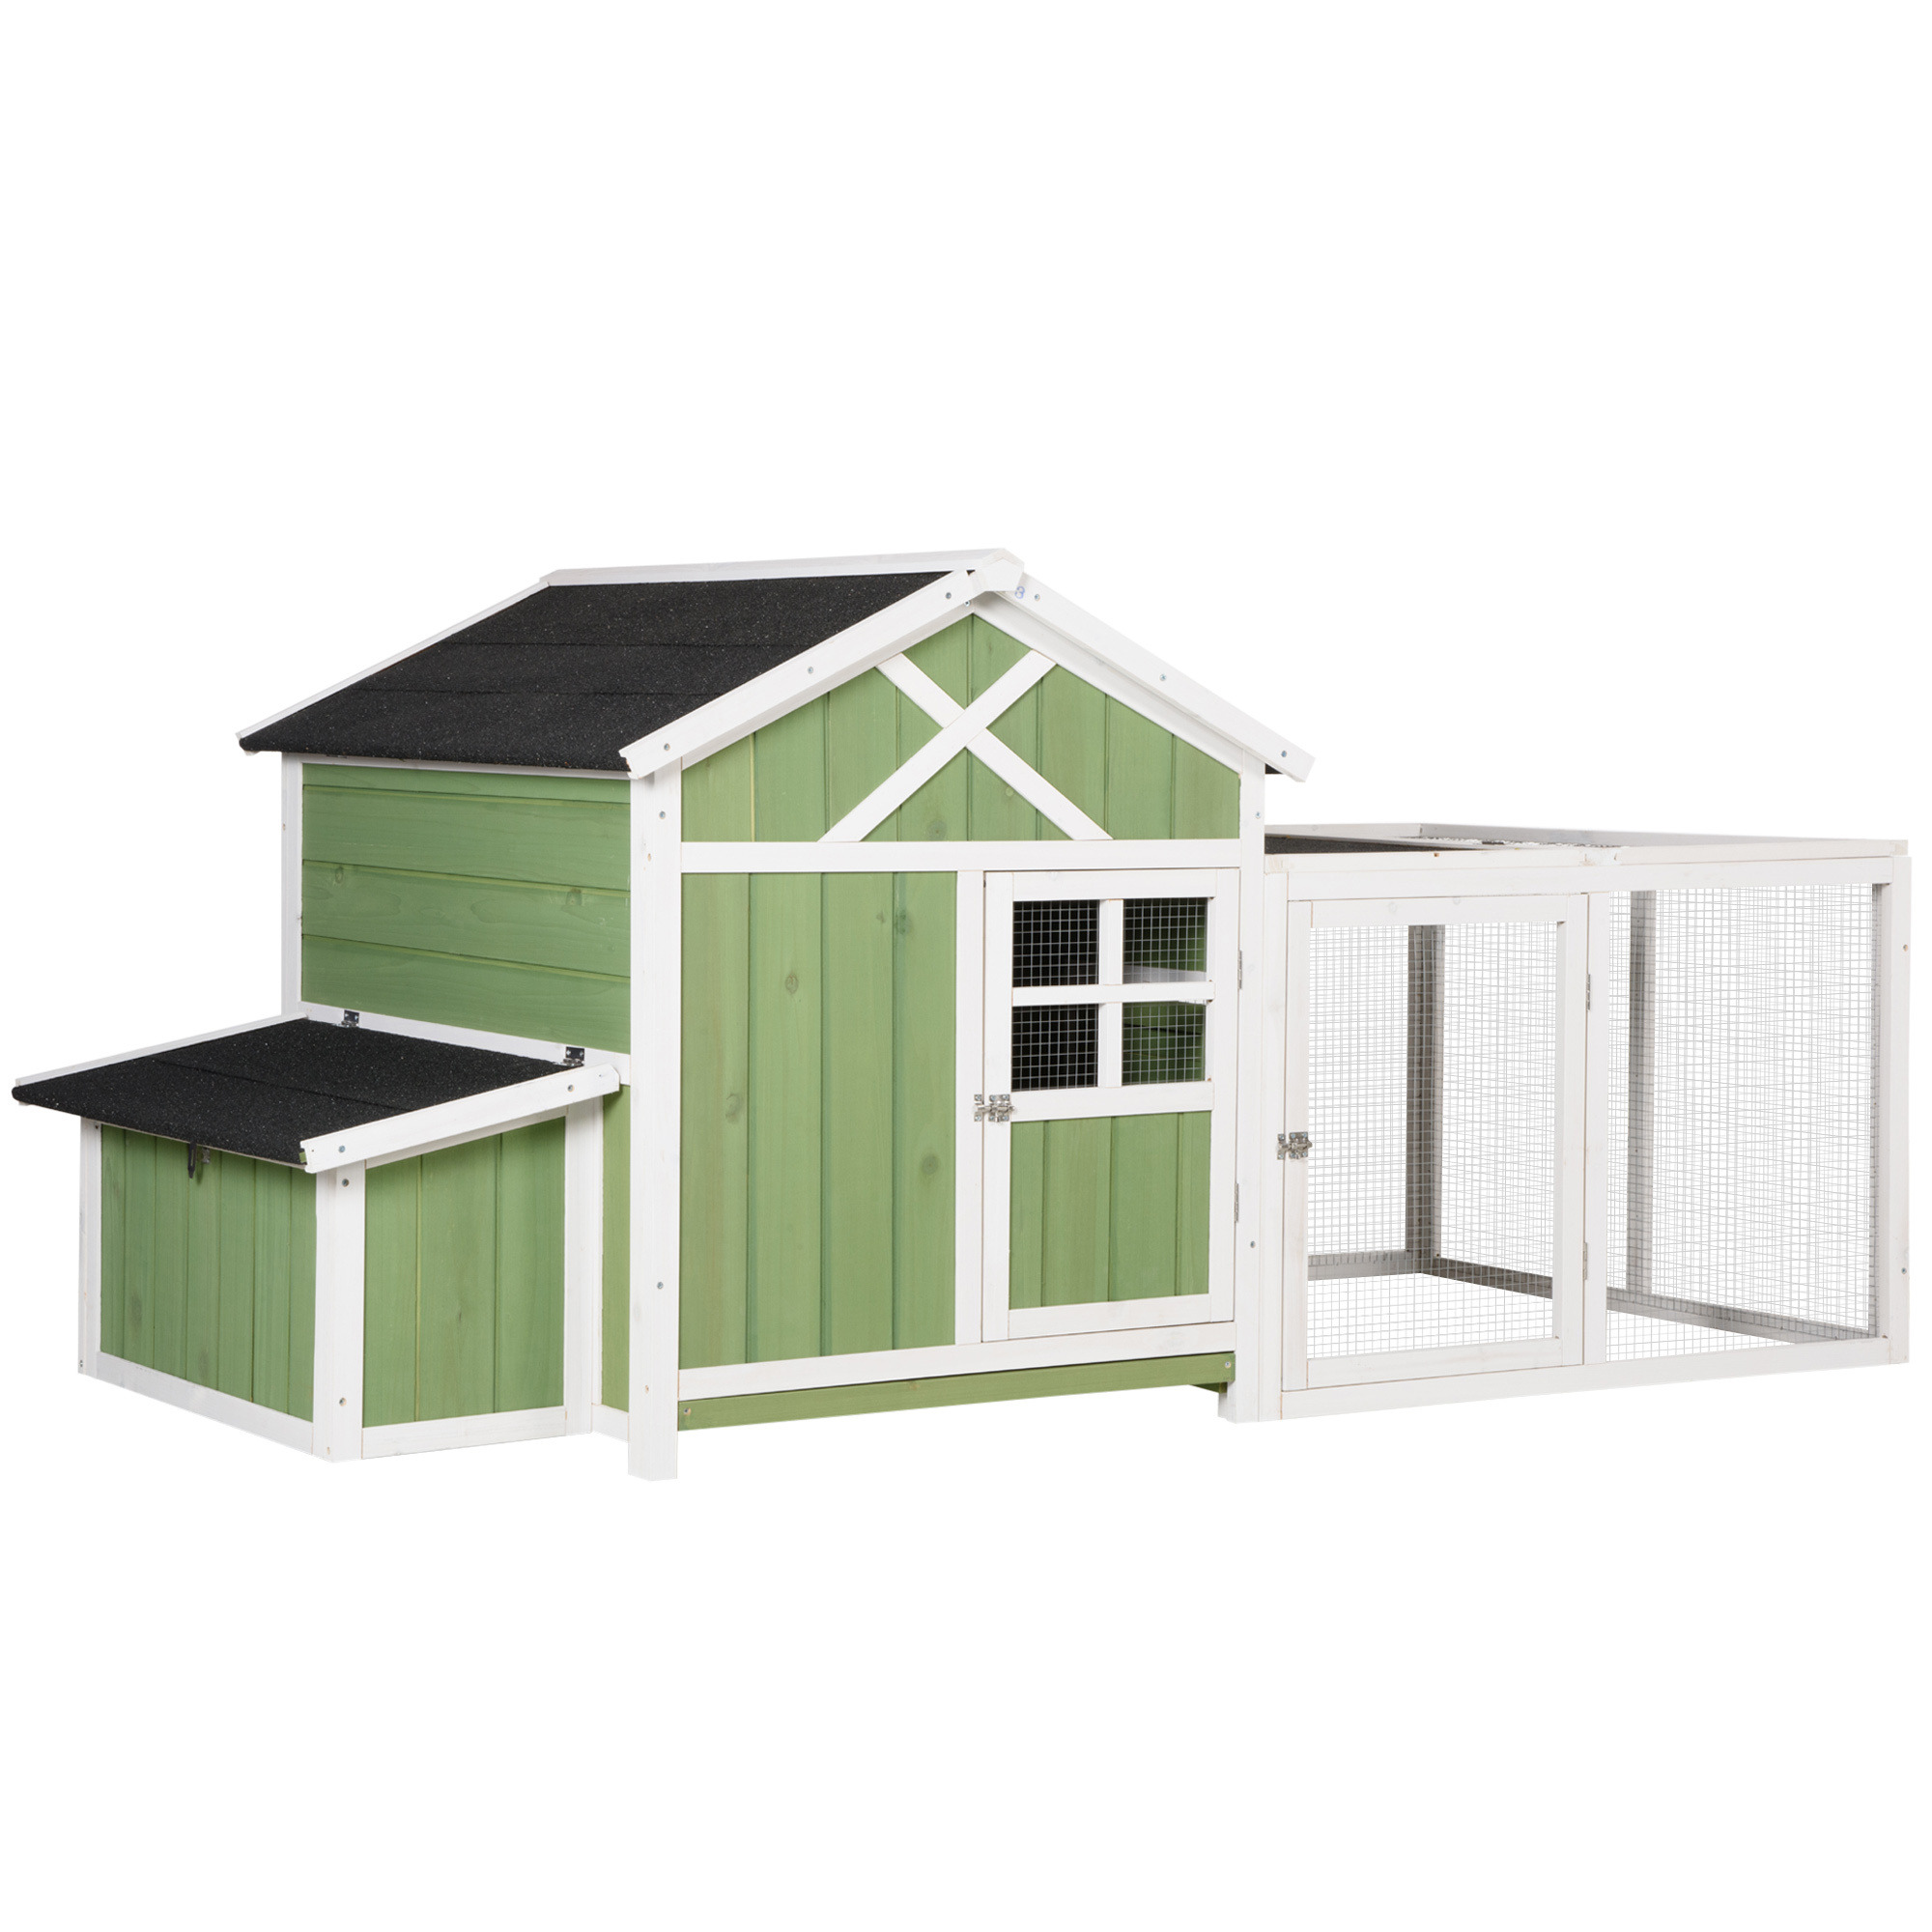 PawHut Chicken Coop with Outdoor Run, Chicken Run with Nesting Box, Wooden Poultry Cage with Removable Tray, Openable Roof and Lockable Doors